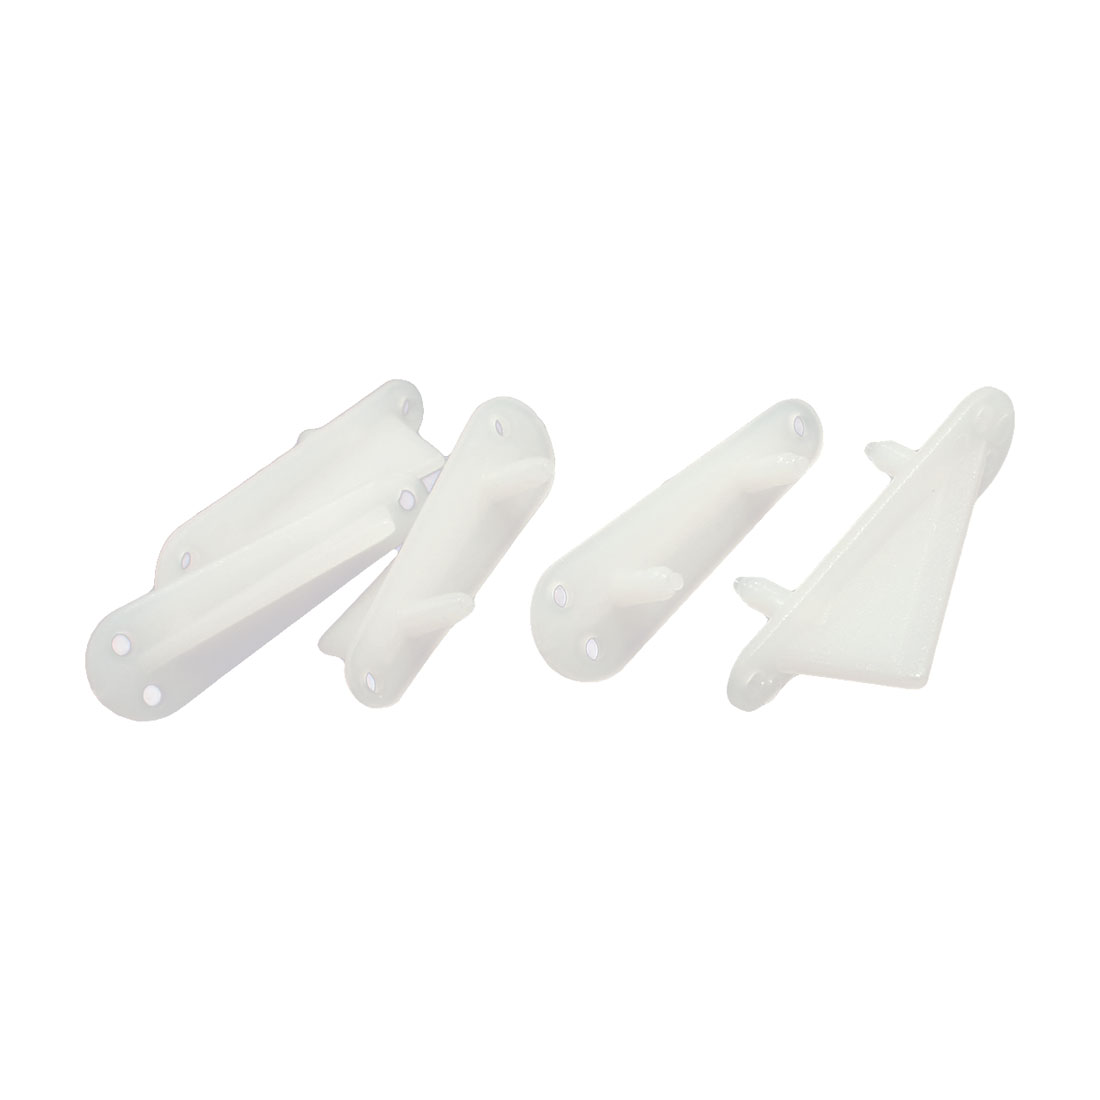 Unique Bargains 5Pcs White Plastic Terminal Triangle Control Horn L40xH14mm for Fixed Wing